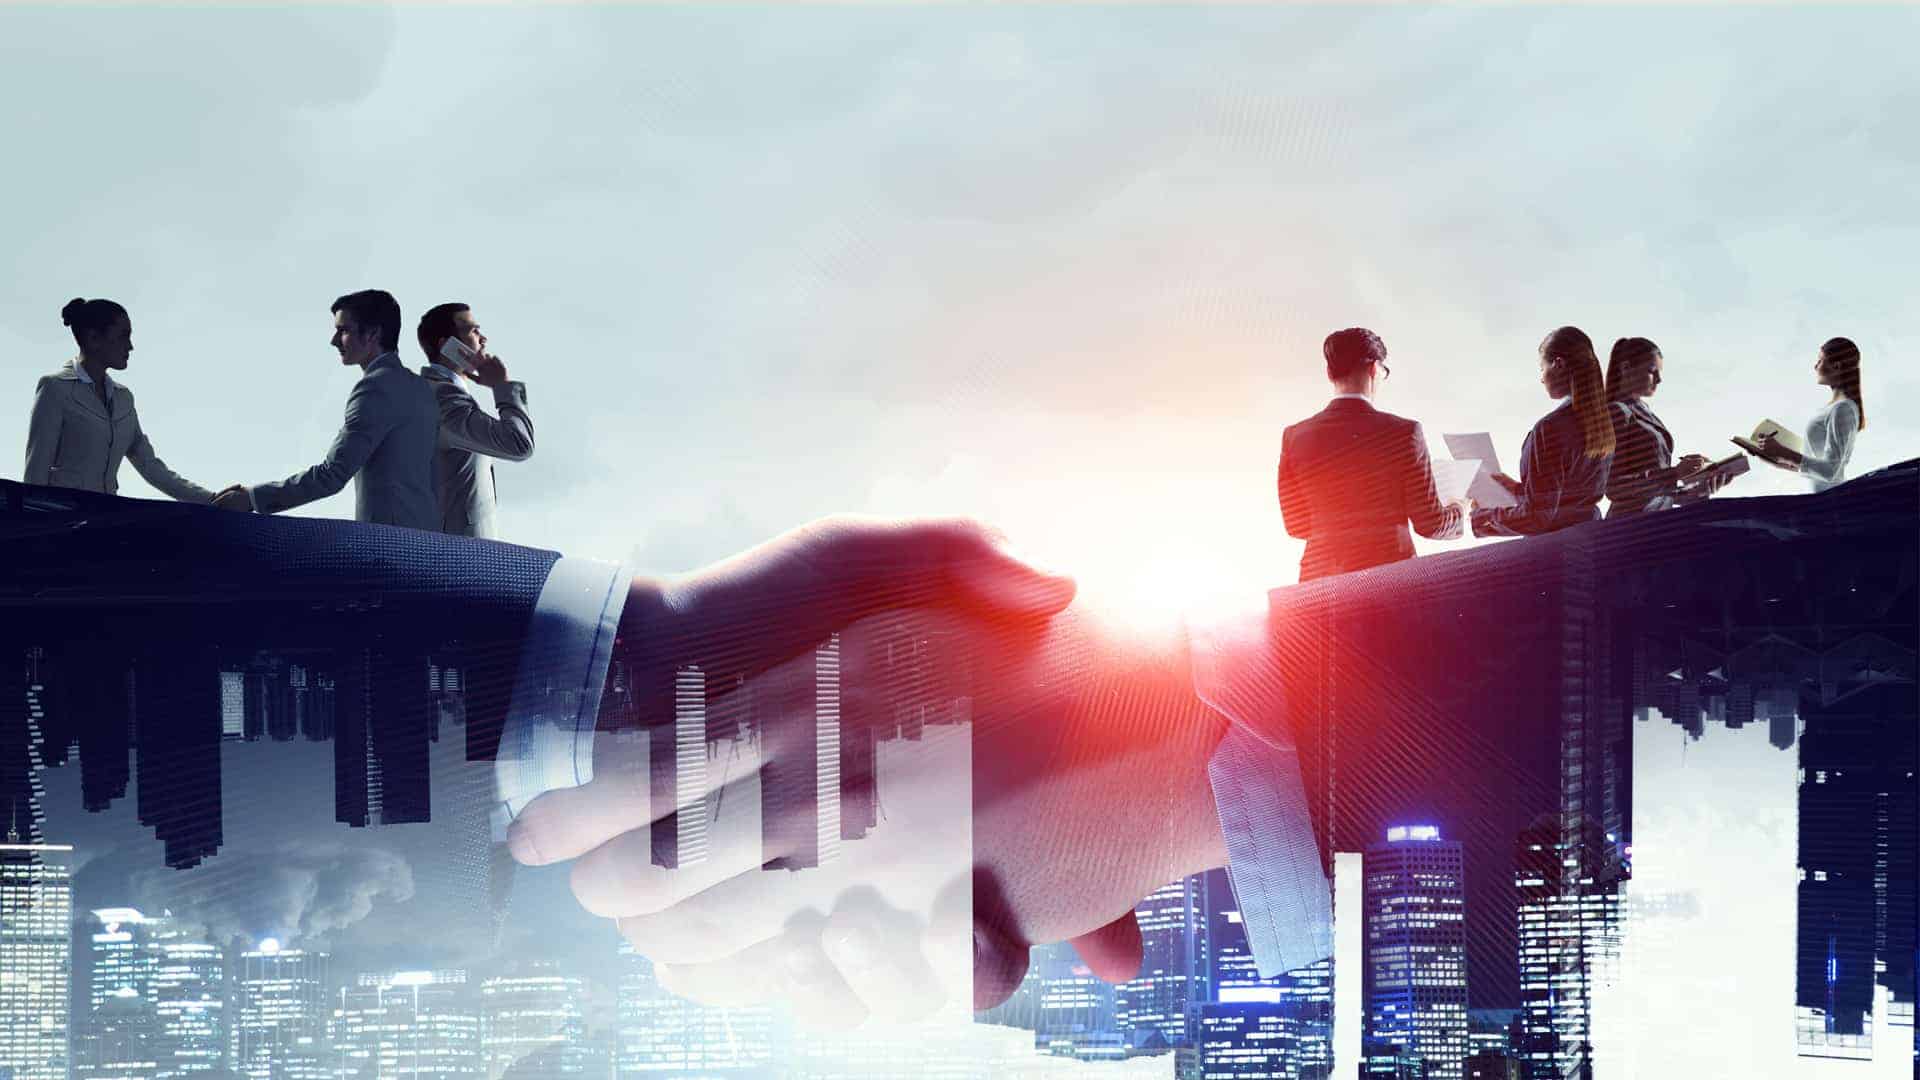 mixed media of business people, skyline, and superimposed handshake